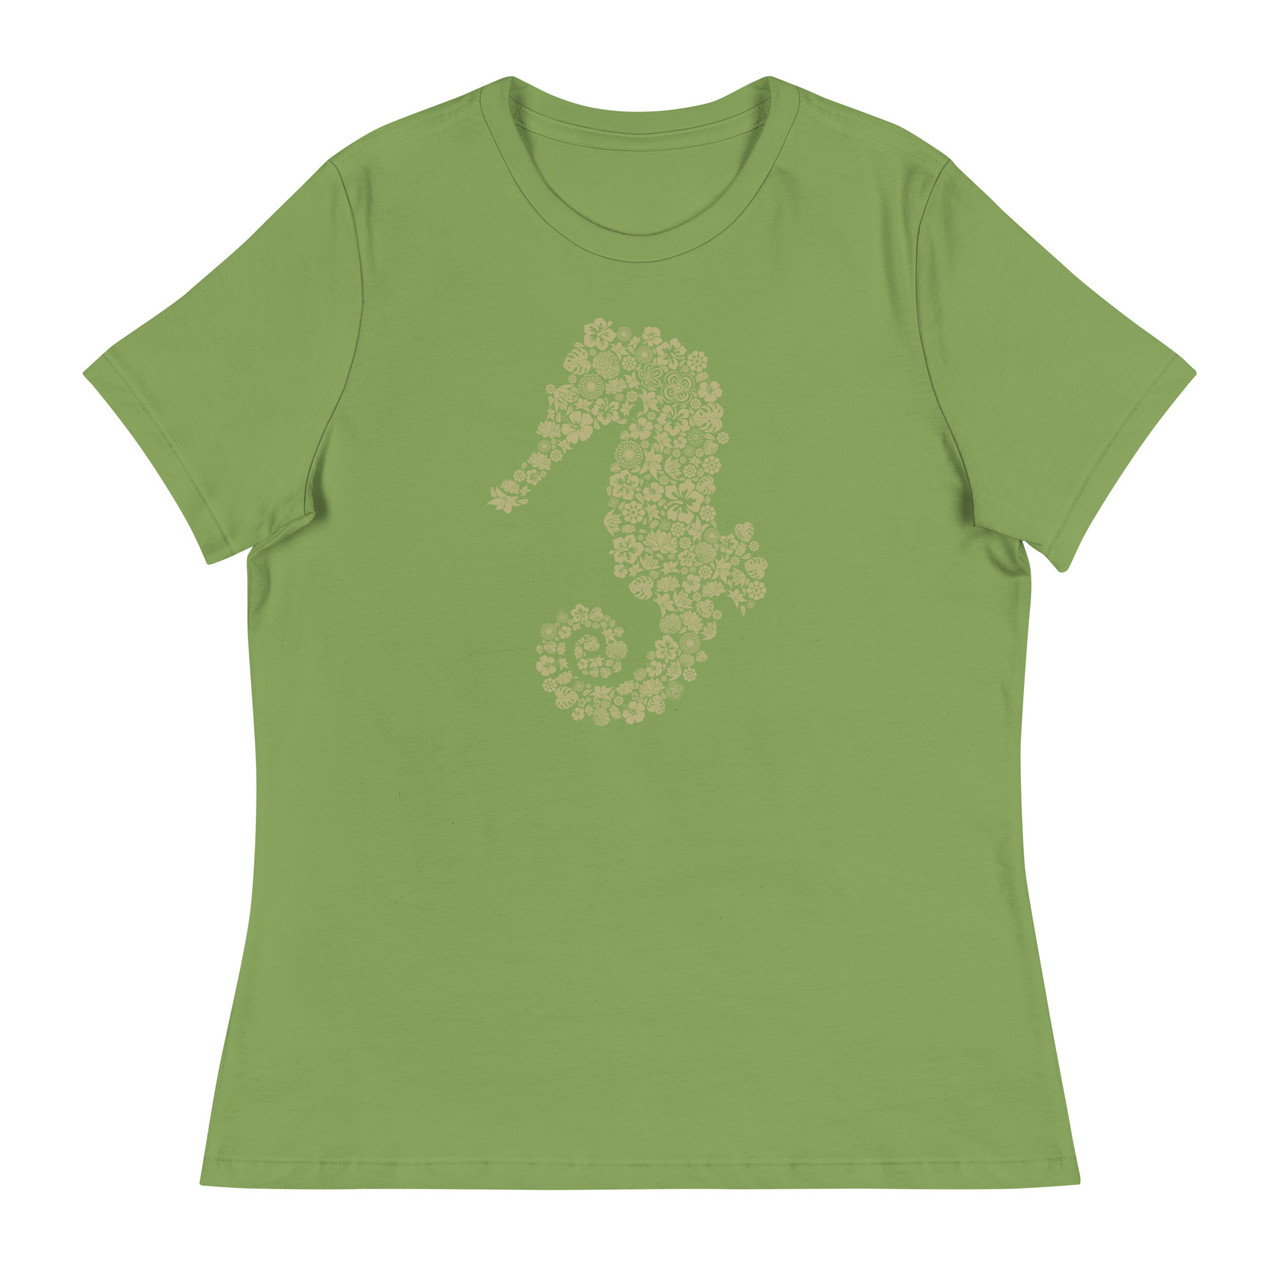 Seahorse Women's Relaxed T-Shirt - Bella + Canvas 6400 